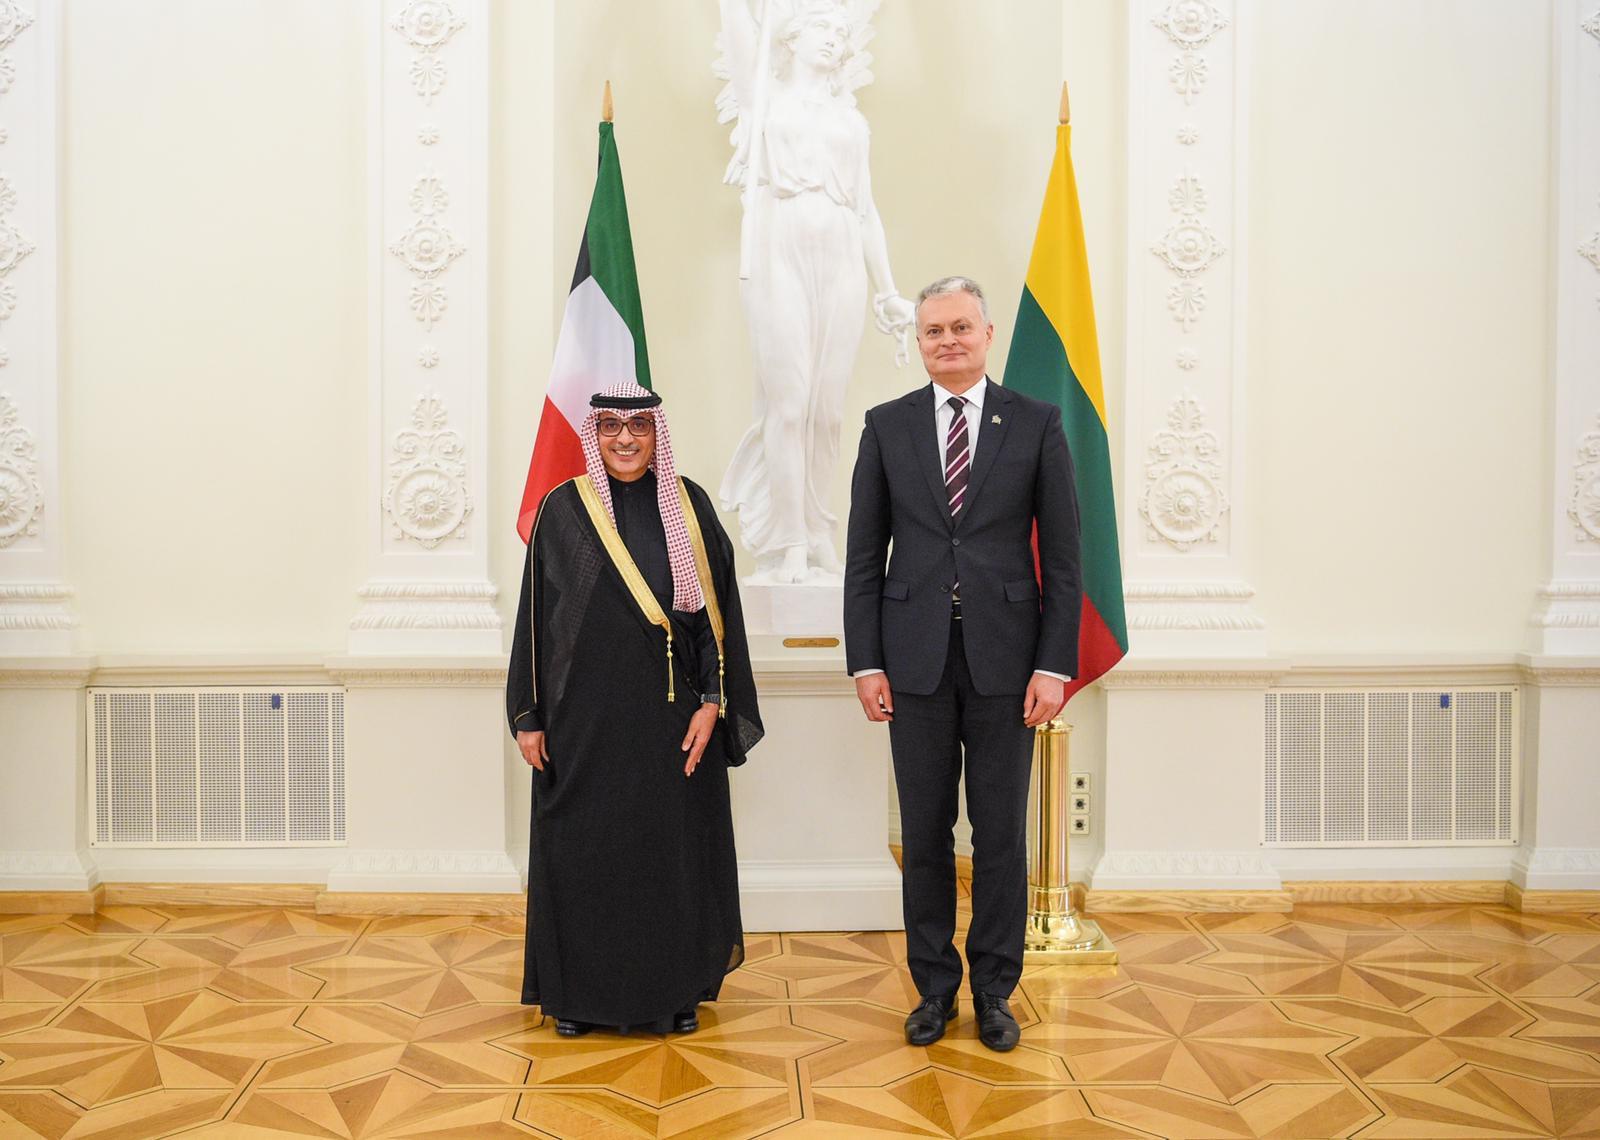 The Ambassador of Kuwait to Germany presented his credentials  to the President of Lithuania